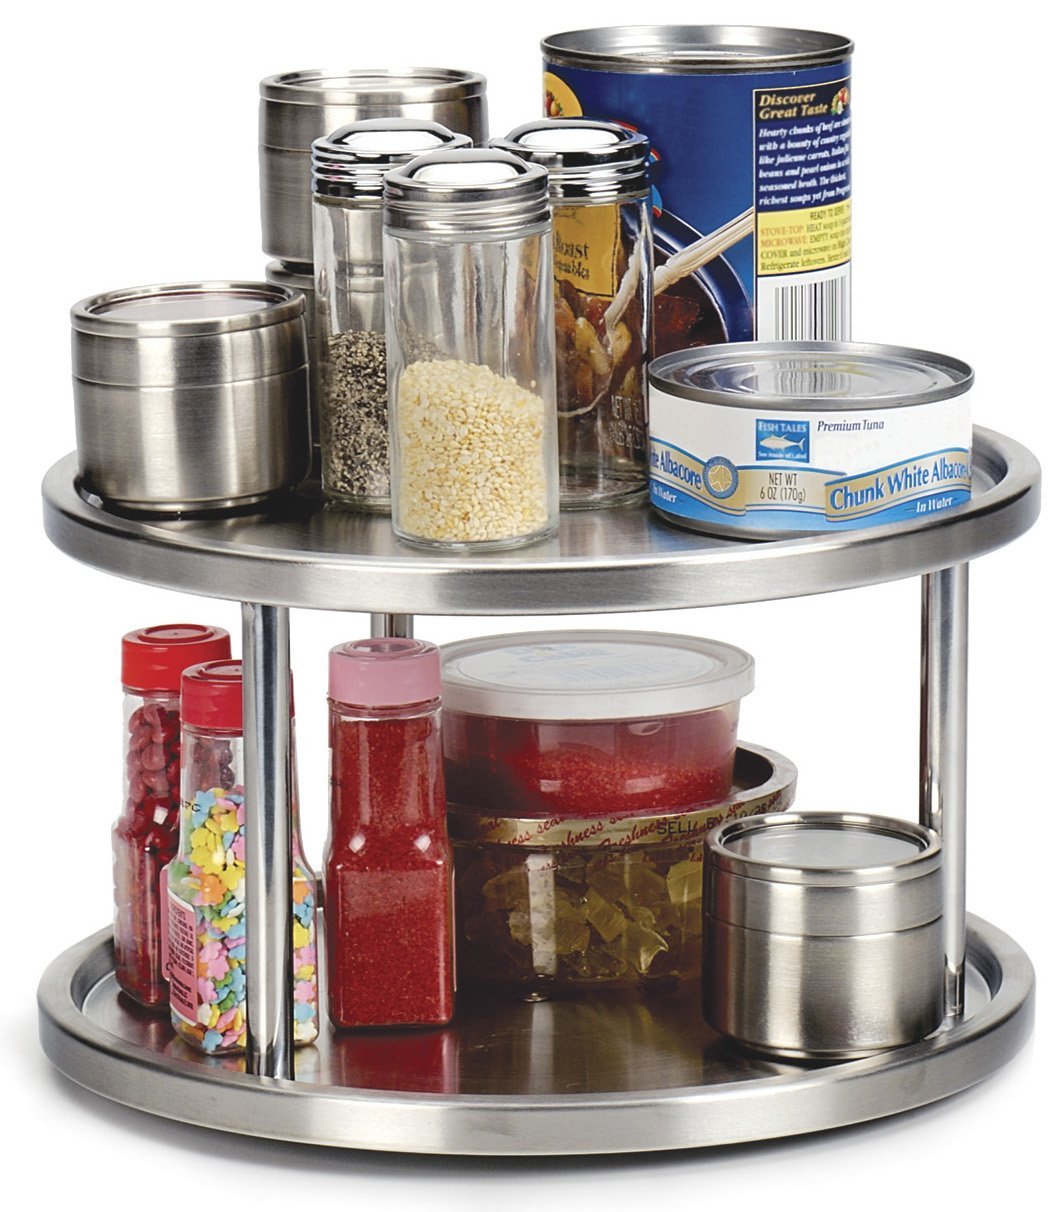 RSVP Stainless Steel 2 Tier Kitchen Turntable | 25+ Gifts for Her 